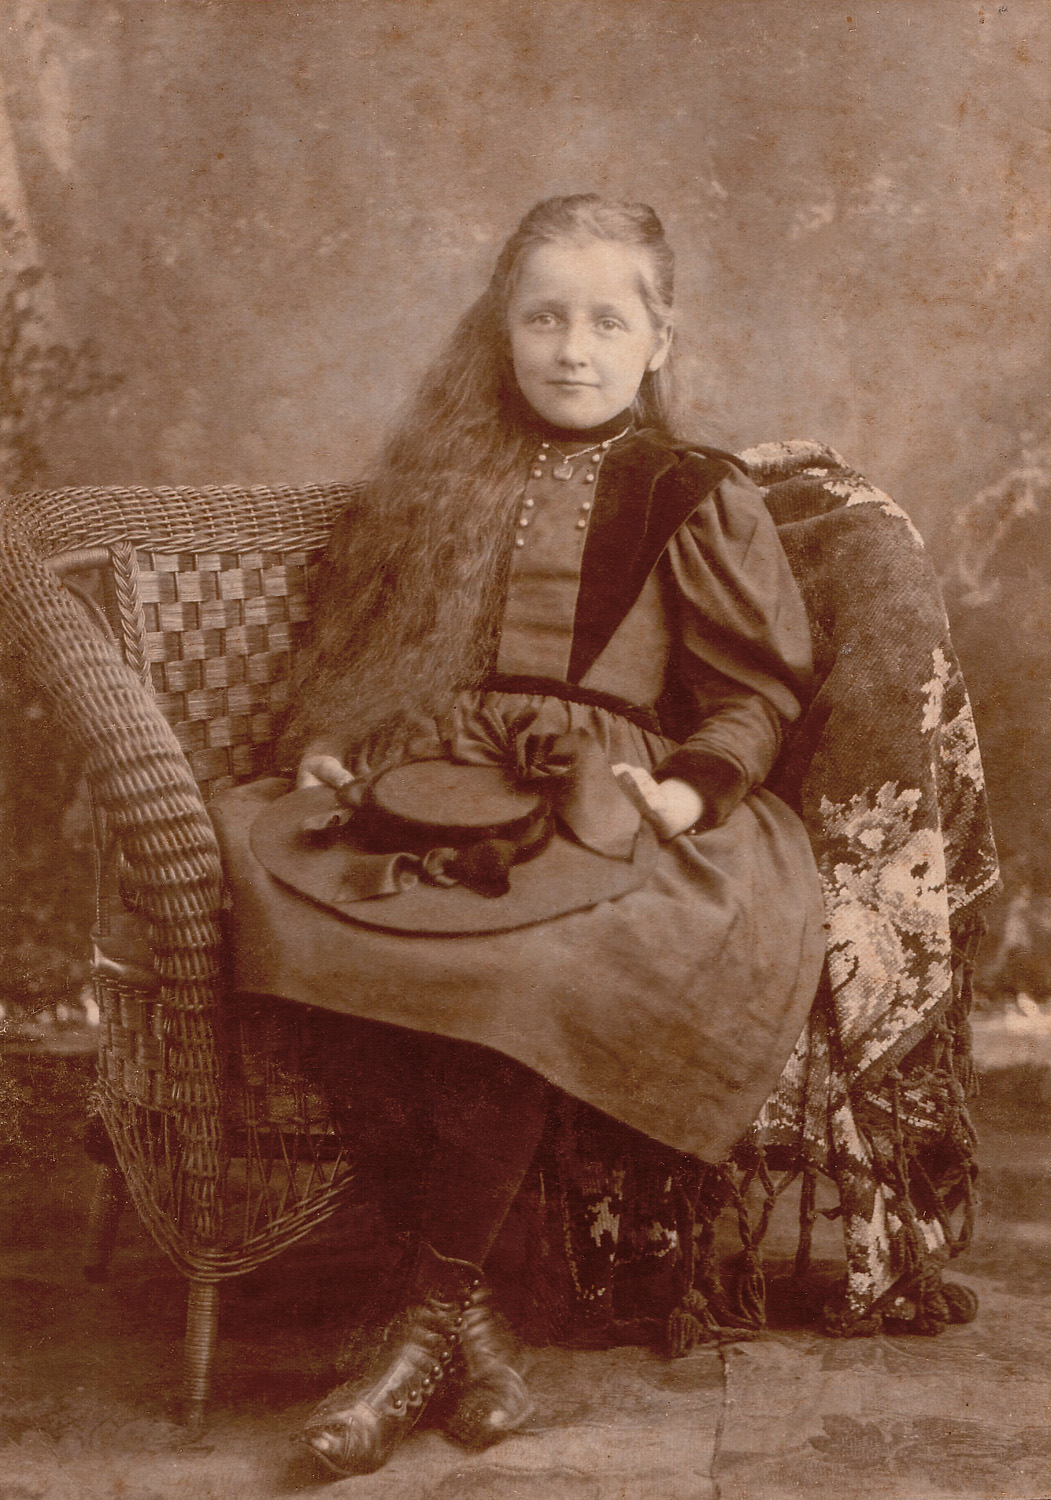 Nice hat! My grandmother's half-sister, Minnie Lou Carr, about 1900. View full size.